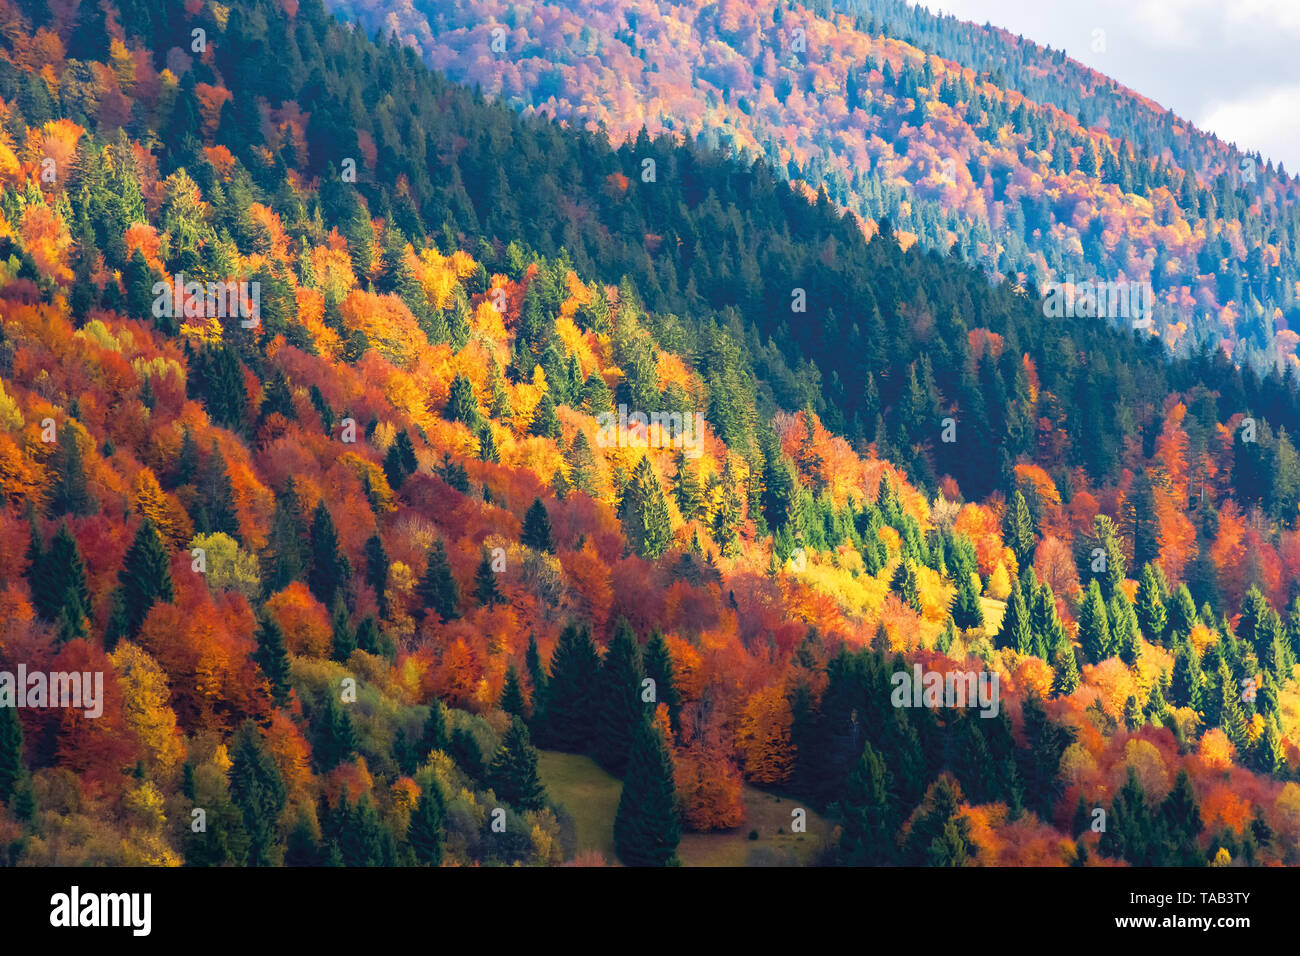 bright autumn scenery in mountains. forest on hills in colorful foliage. sunny evening with cloudy sky Stock Photo